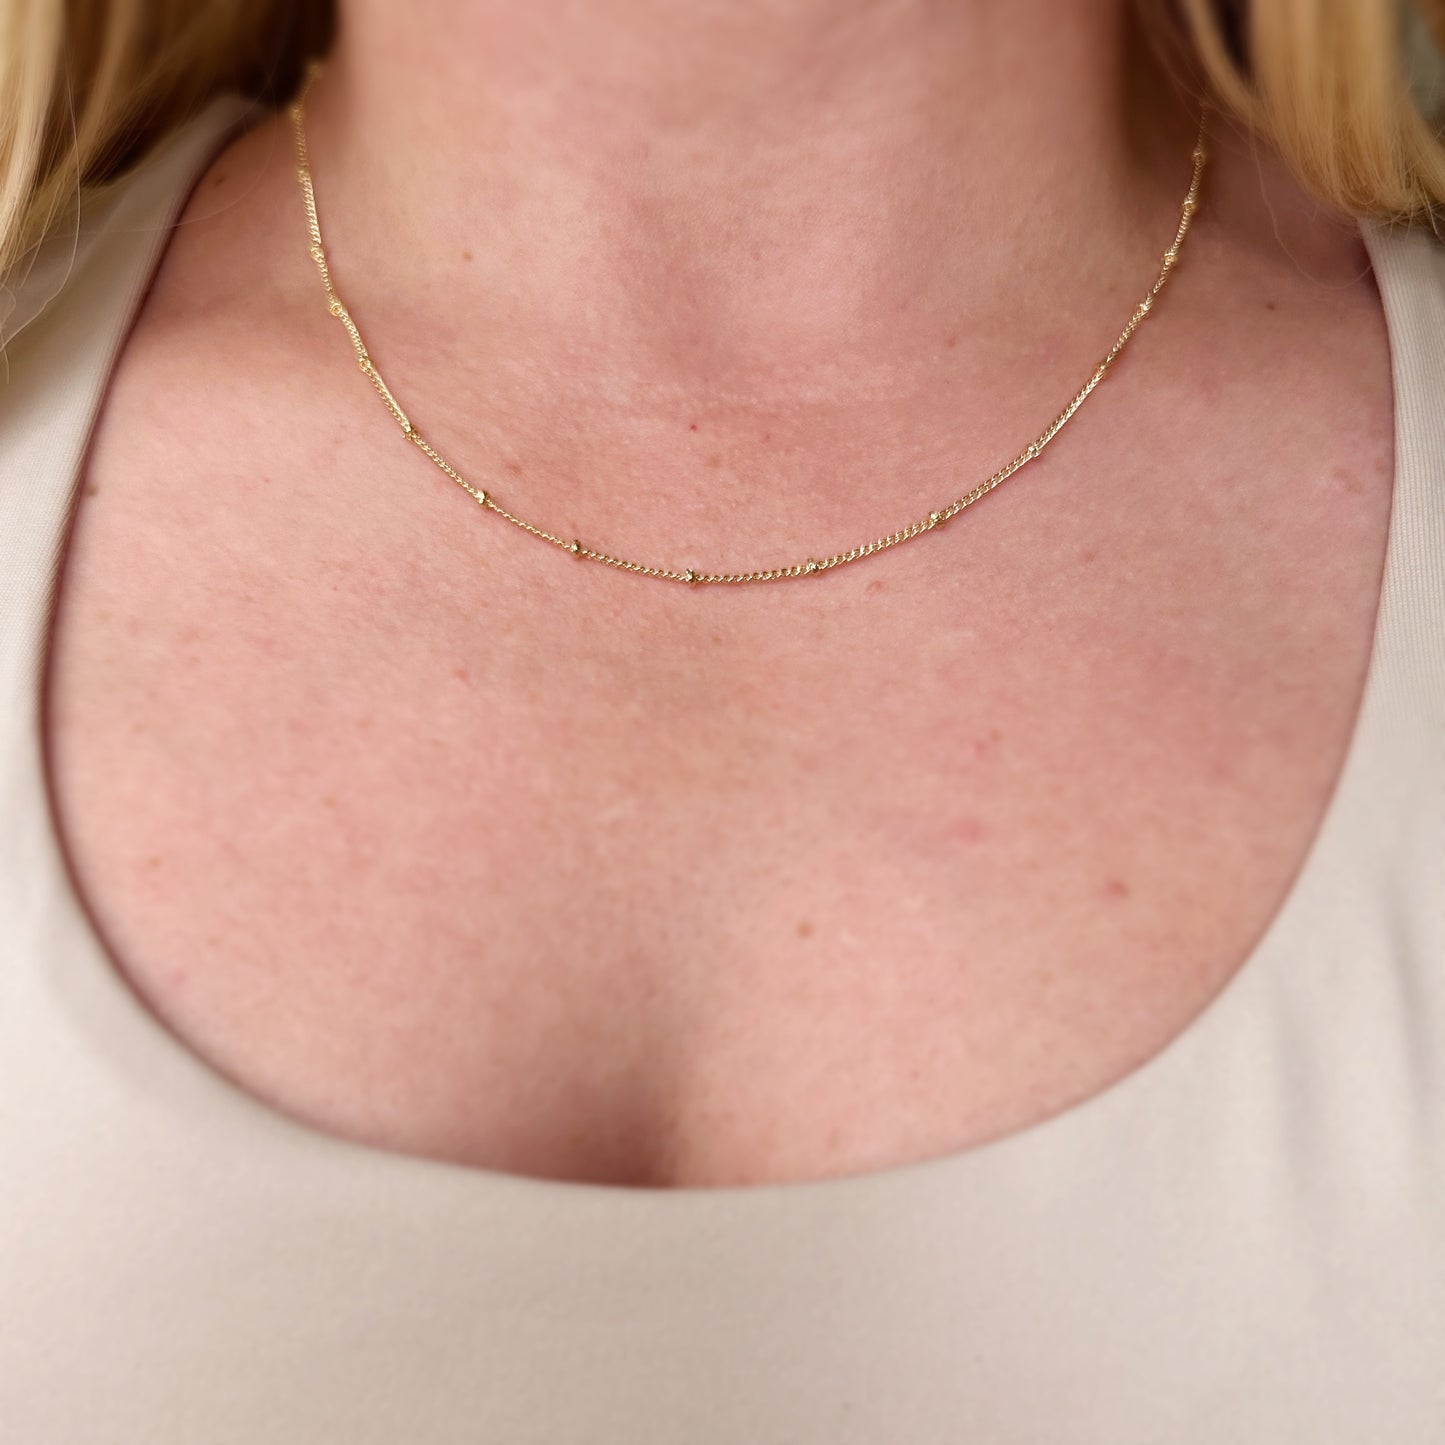 18k Gold Filled 1mm Satellite Chain in 16", 18", 20", 22" Length